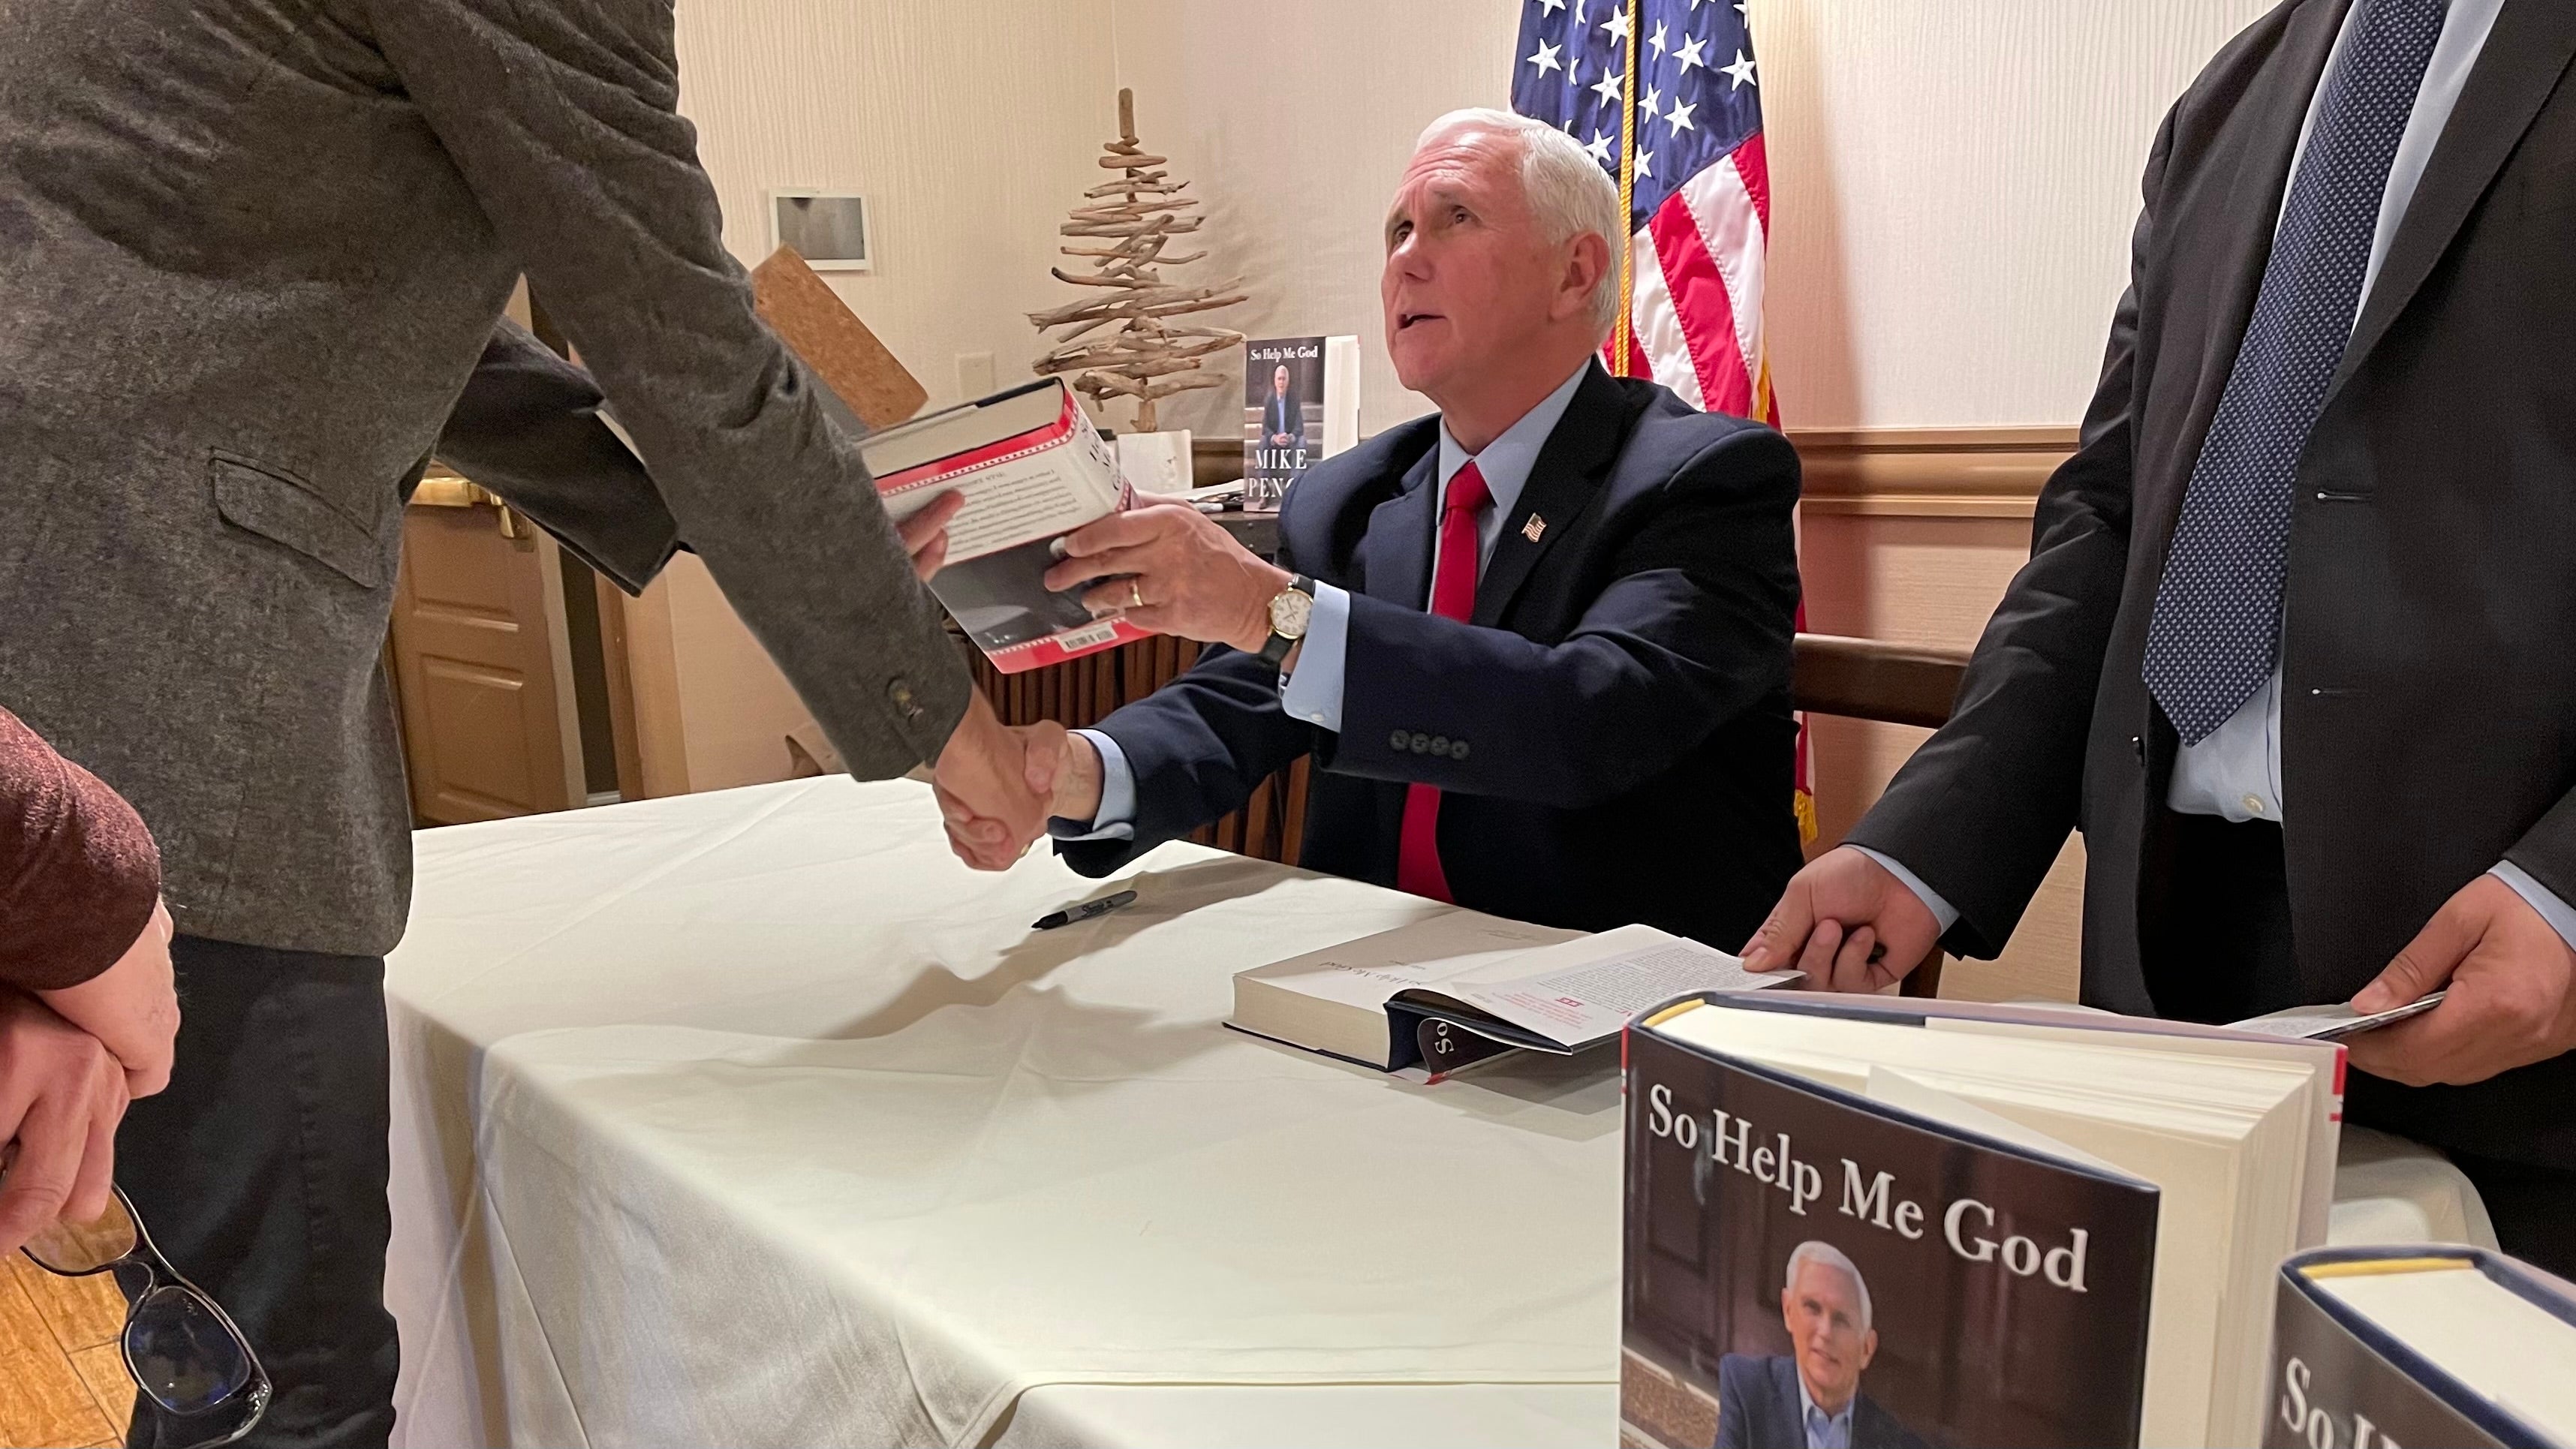 Former VP Pence says positive response to autobiography ‘great source of encouragement’ as he mulls 2024 bid